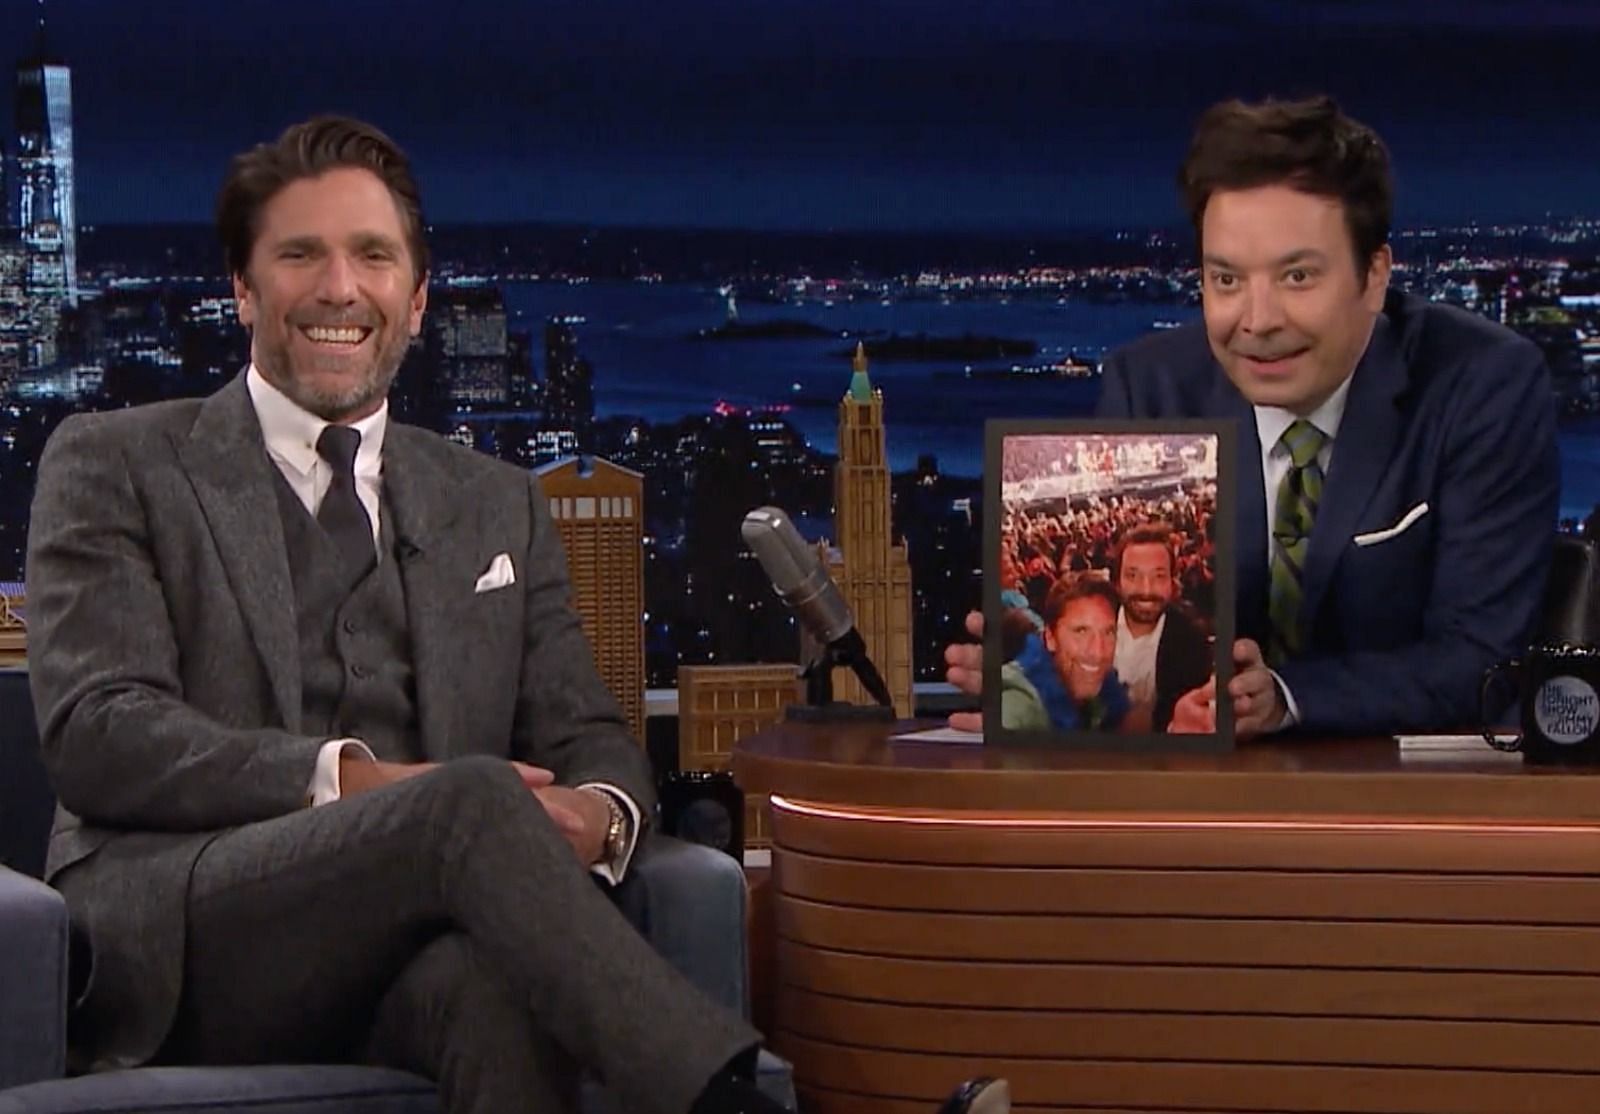 How Henrik Lundqvist made Jimmy Fallon take some heat during Harry Styles concert